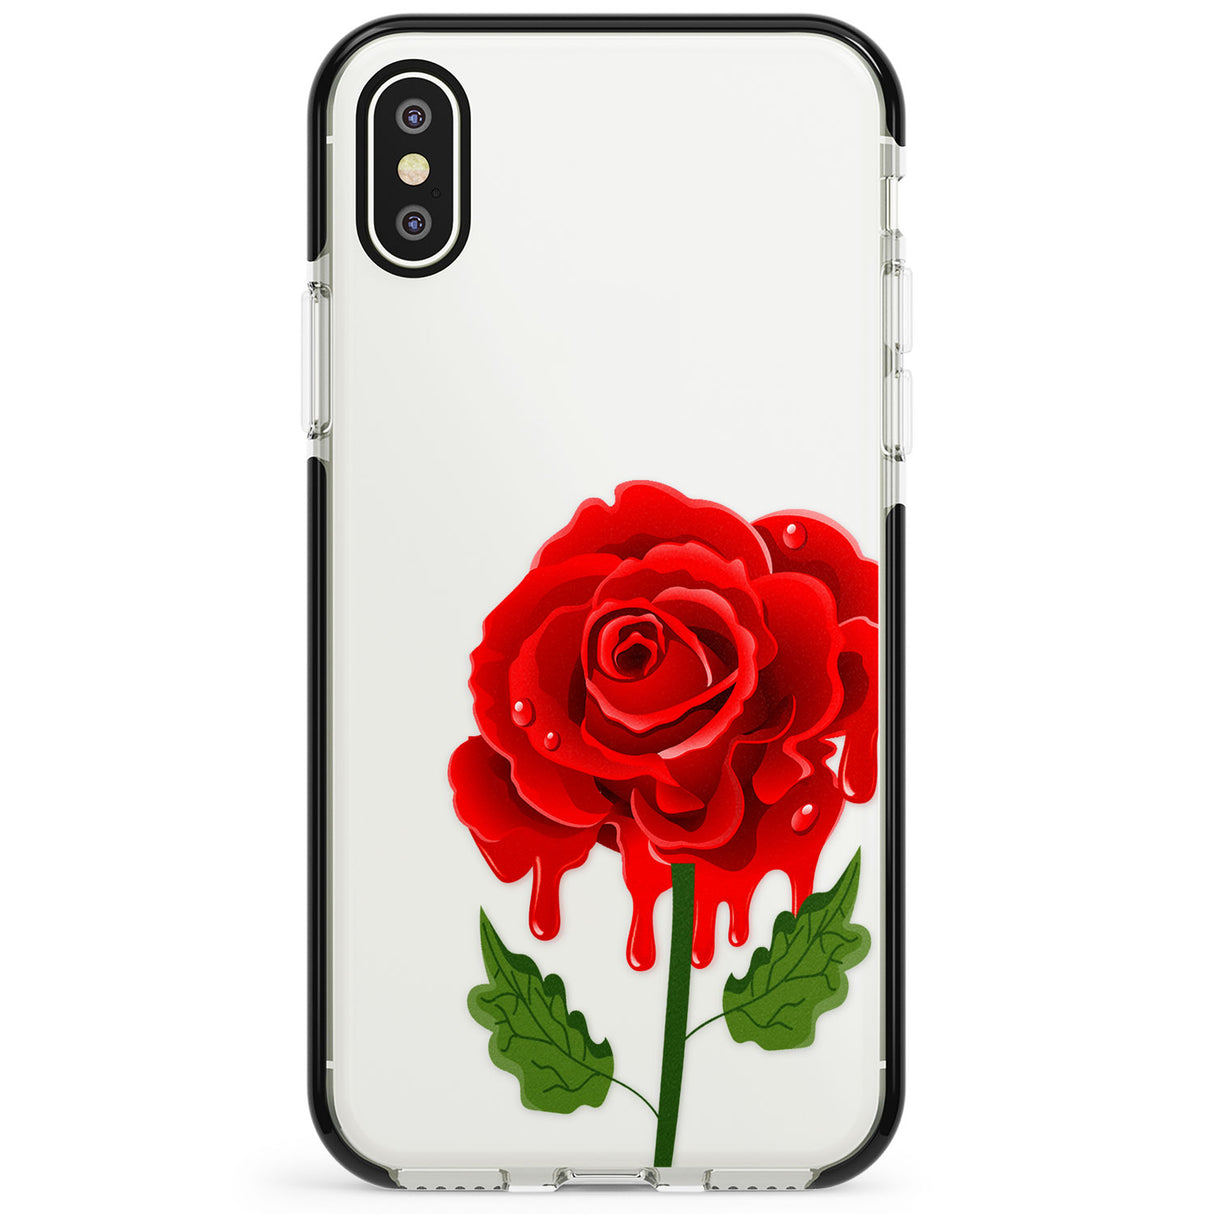 Melting Rose Phone Case for iPhone X XS Max XR